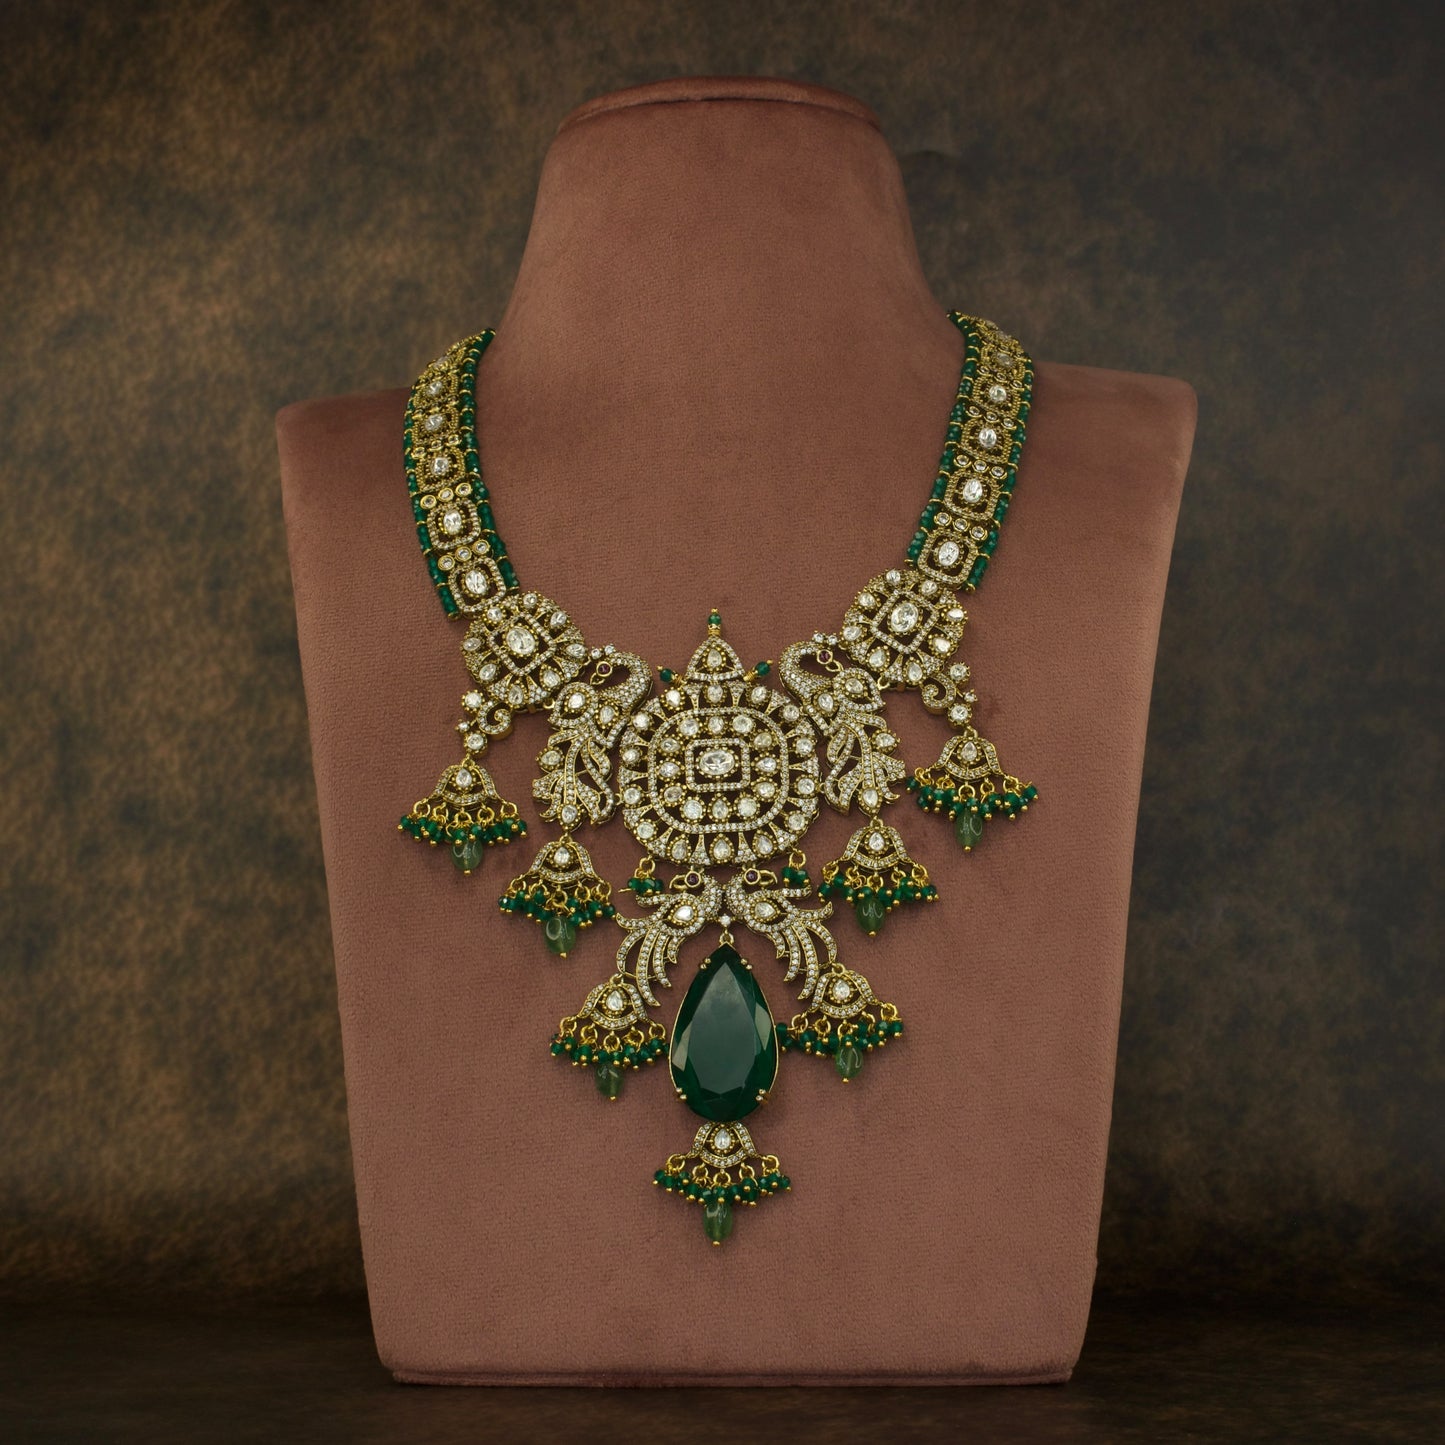 Bridal Victorian Necklace set with emerald drops & pearls with High quality Victorian Finish. This Product belongs to Victorian Jewellery category